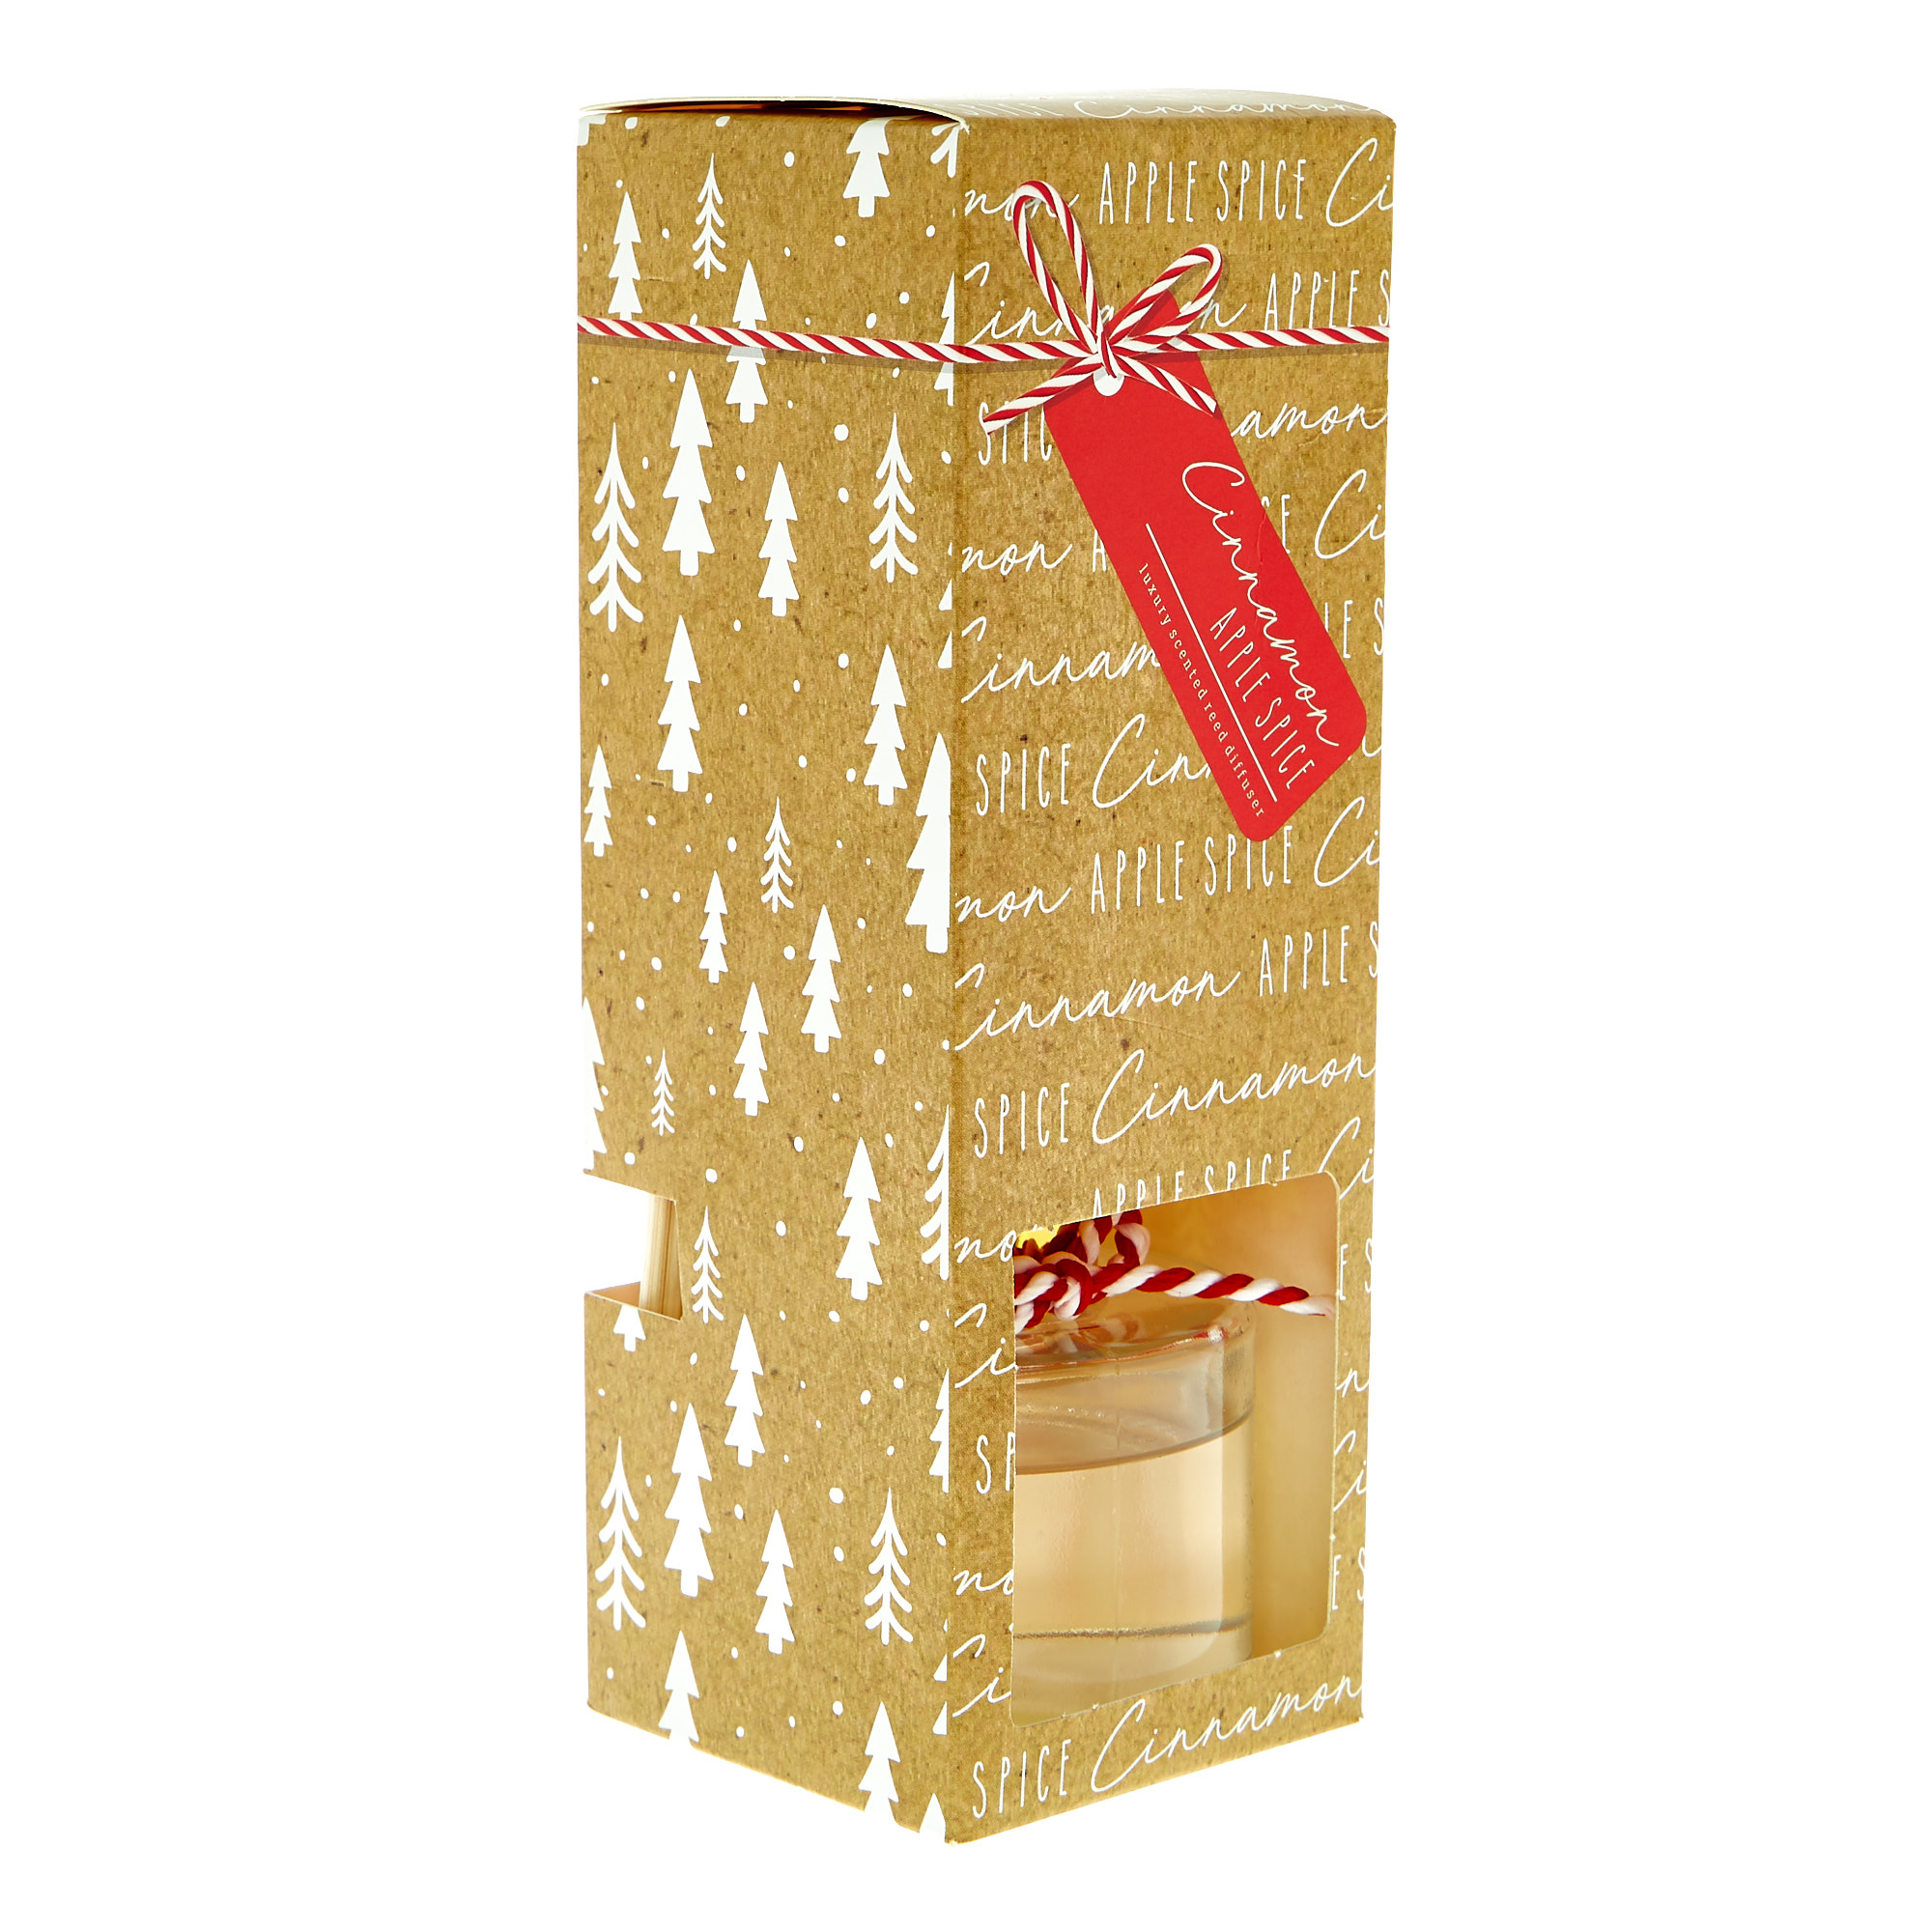 Cinnamon Apple Spice Luxury Scented Reed Diffuser